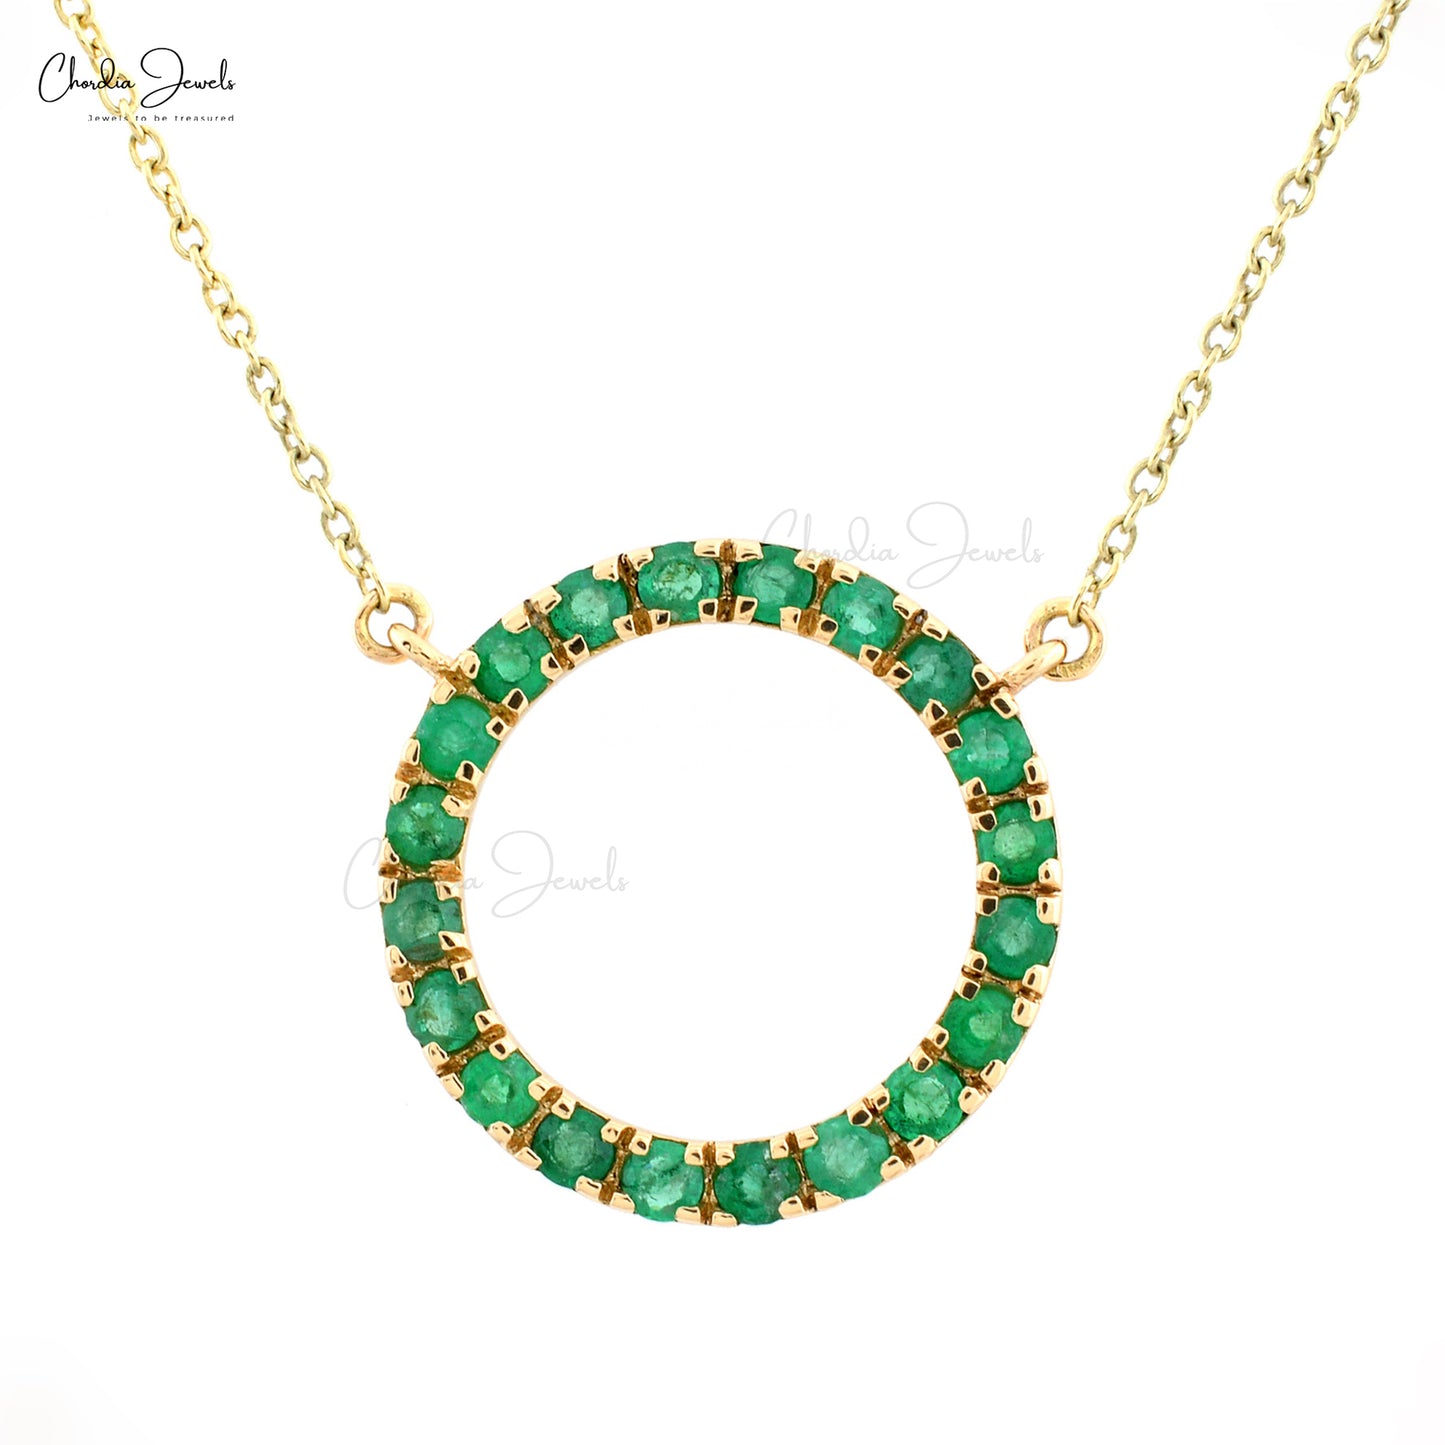 Round 2mm Cut Genuine Green Emerald Circle Necklace, 0.60 Ct Pave Set Gemstone Necklace For Anniversary Gift, 14k Solid Yellow Gold May Birthstone Hallmarked Jewelry